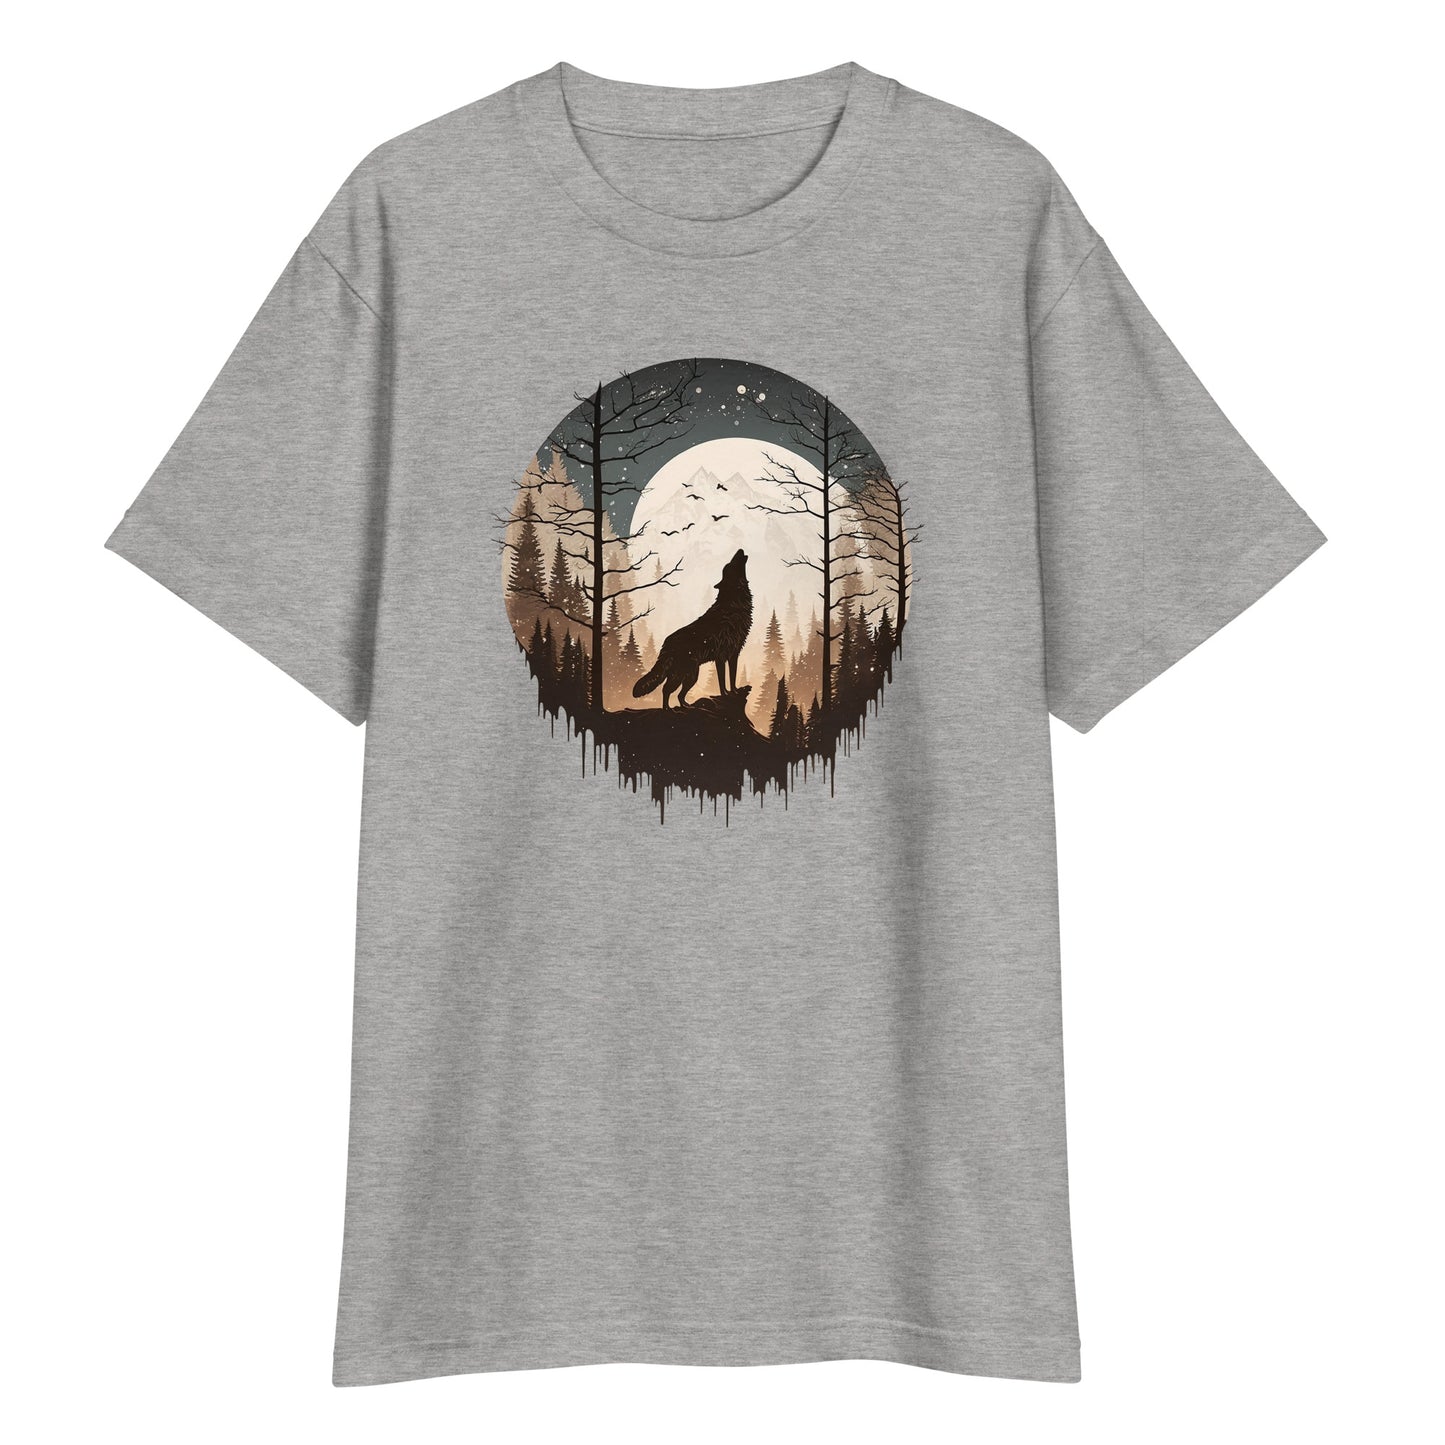 Gray High Quality Tee - Front Design with a Howling Wolf